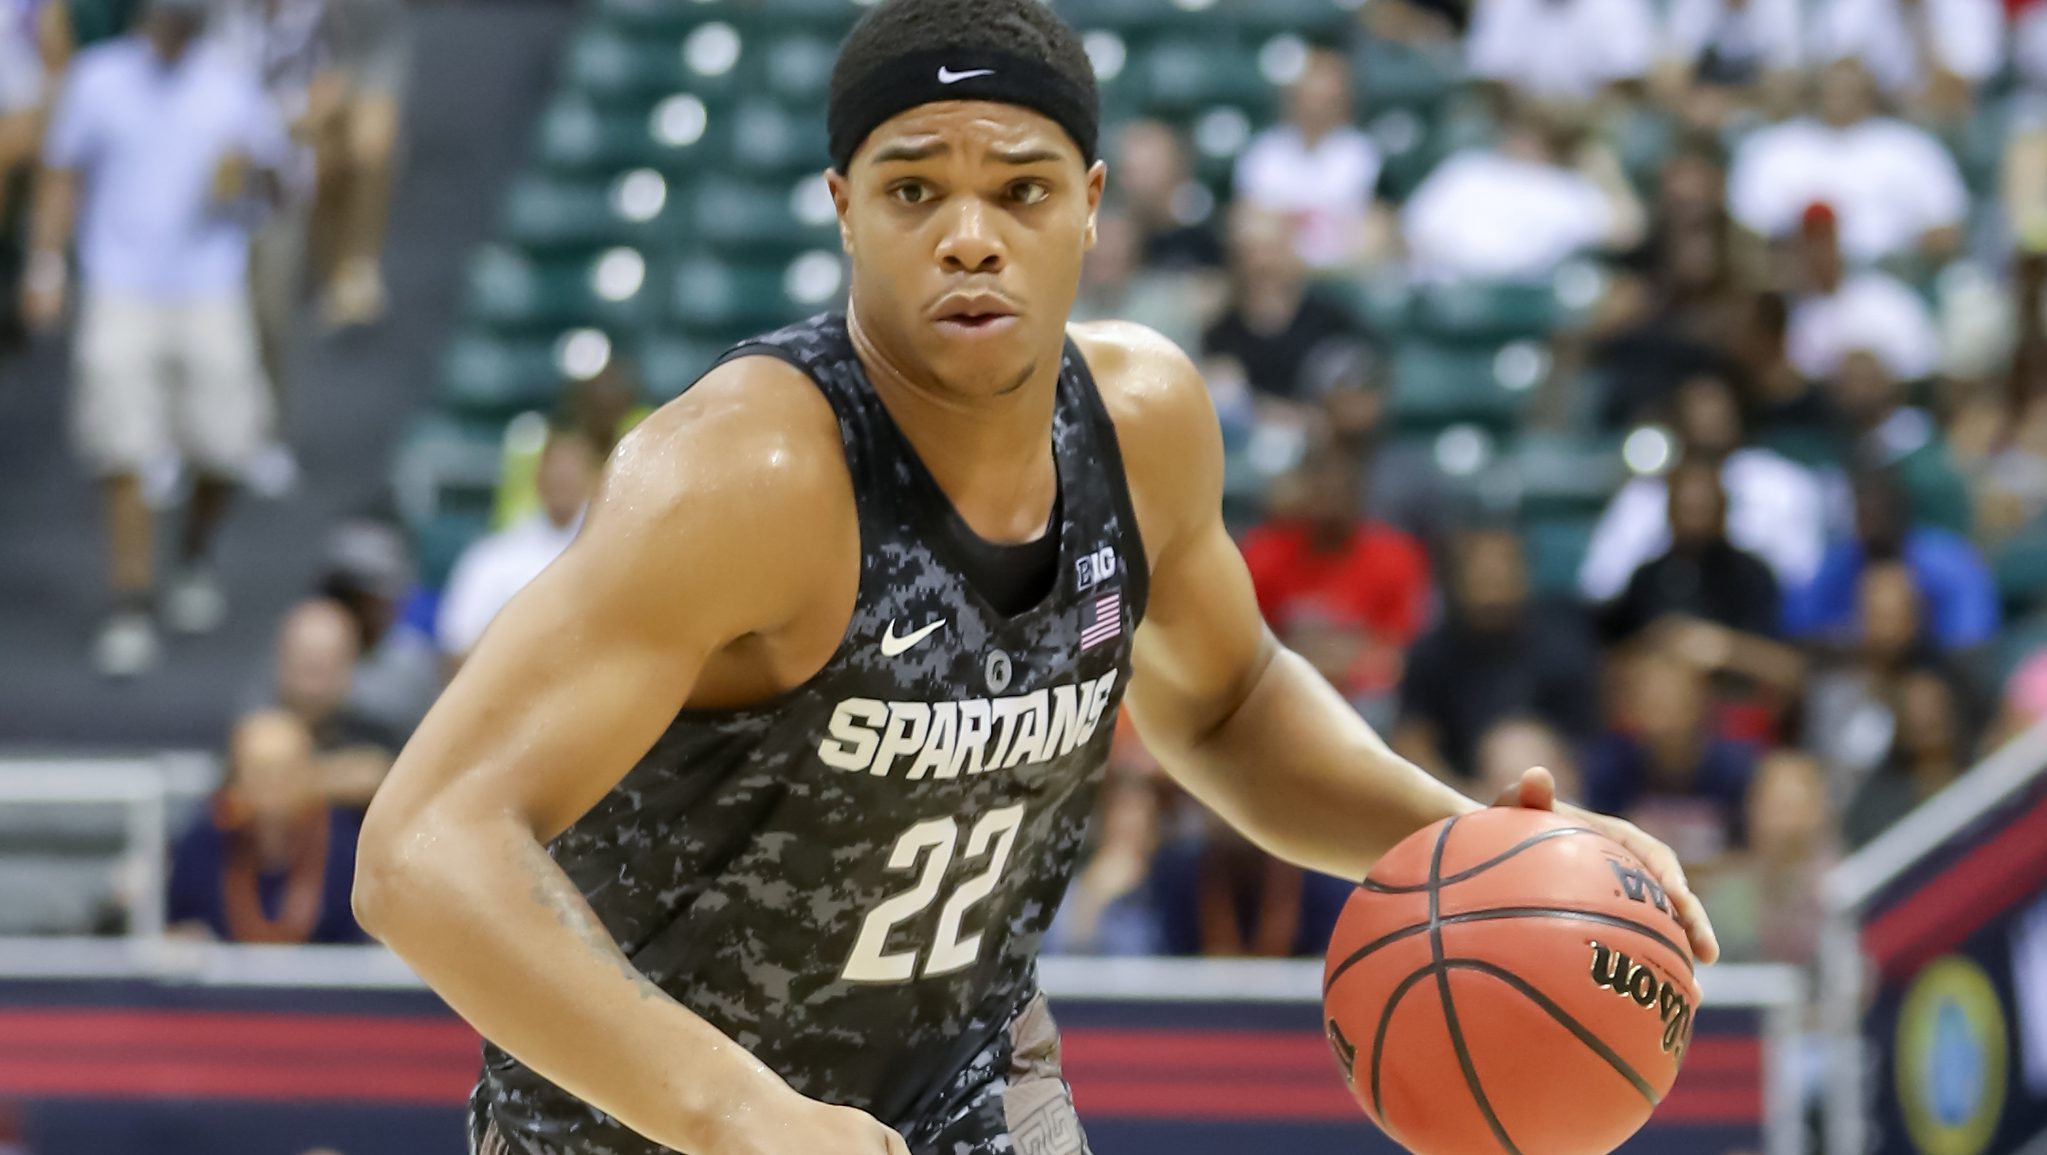 HONOLULU, HI - NOVEMBER 11: Miles Bridges #22 of the Michigan State Spartans drives to the basket during the first half of the Armed Forces Classic at the Stan Sheriff Center on November 11, 2016 in Honolulu, Hawaii. (Photo by Darryl Oumi/Getty Images)